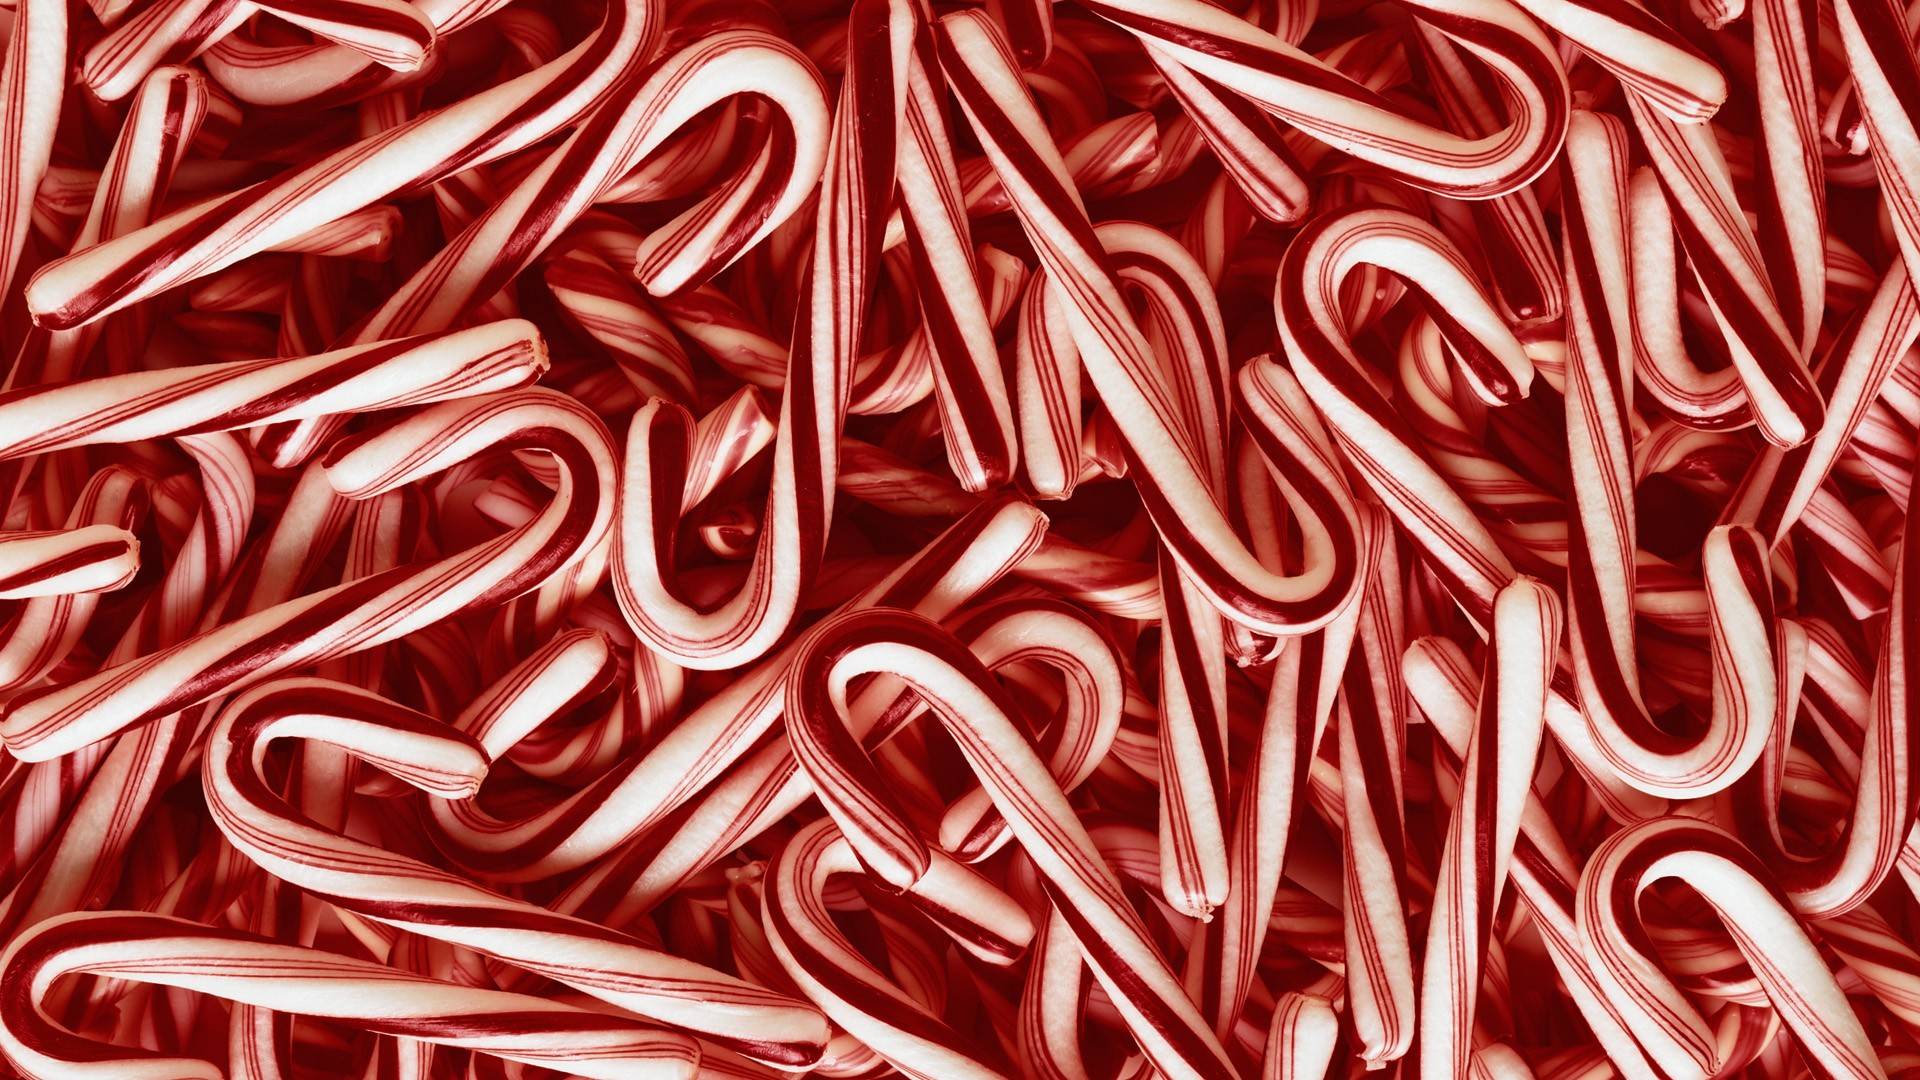 Candy Canes 19201080 Wallpaper 1666040 1920x1080